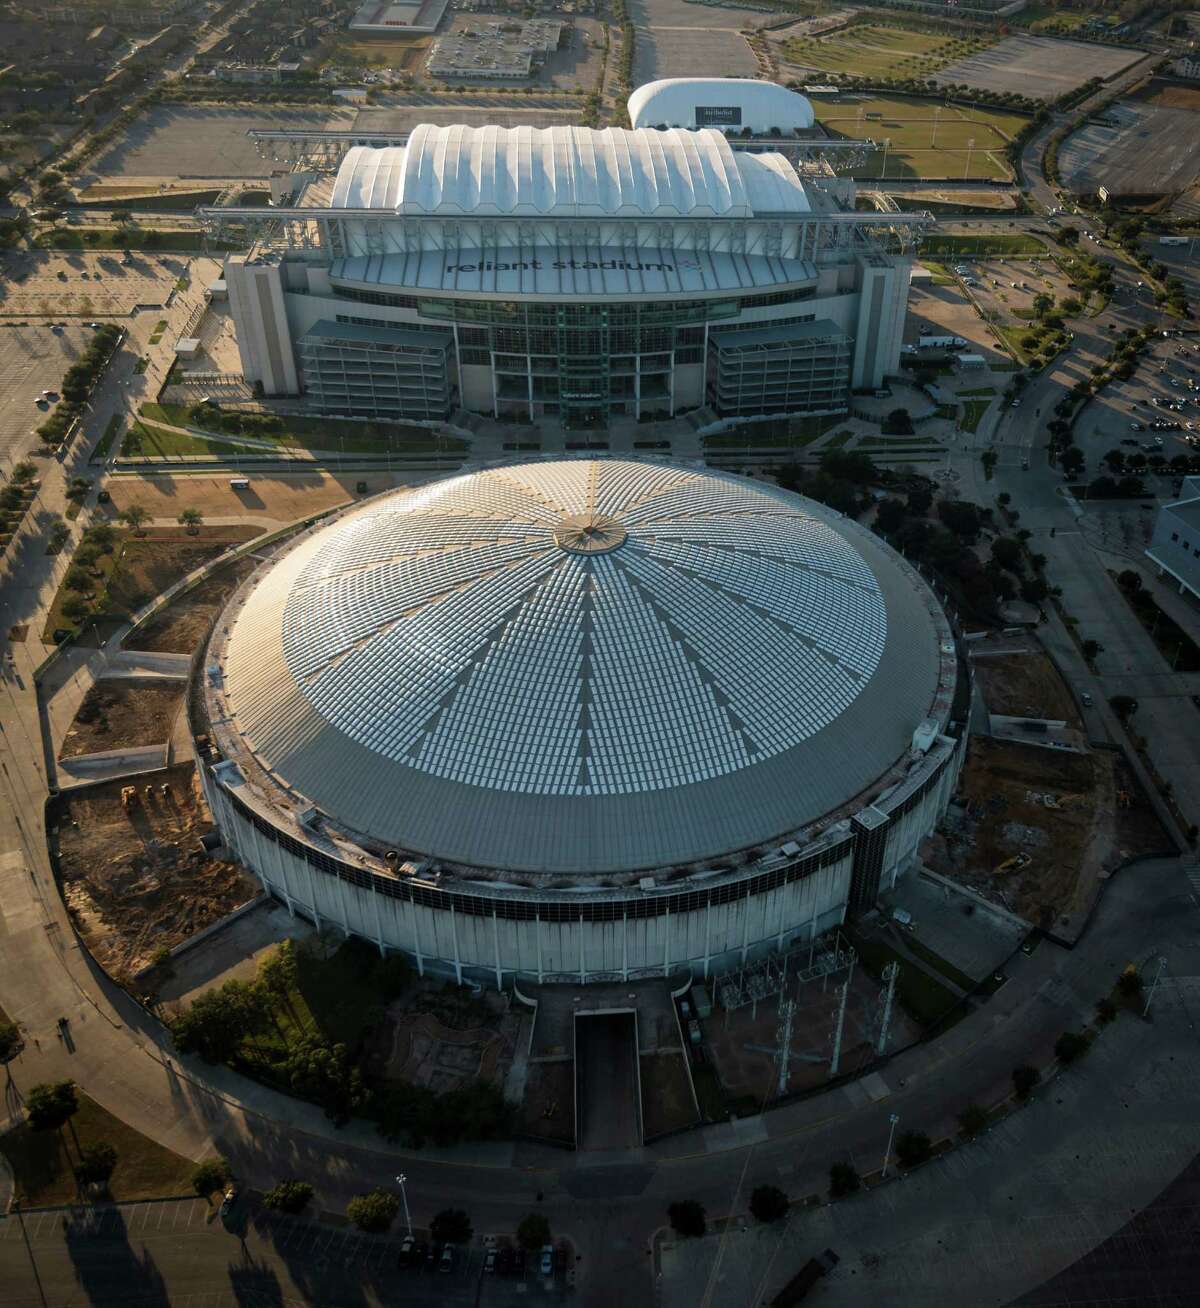 If preservationists are triumphant, the Reliant Astrodome - seen here with the Reliant Stadium - will be around for future Houstonians to enjoy.